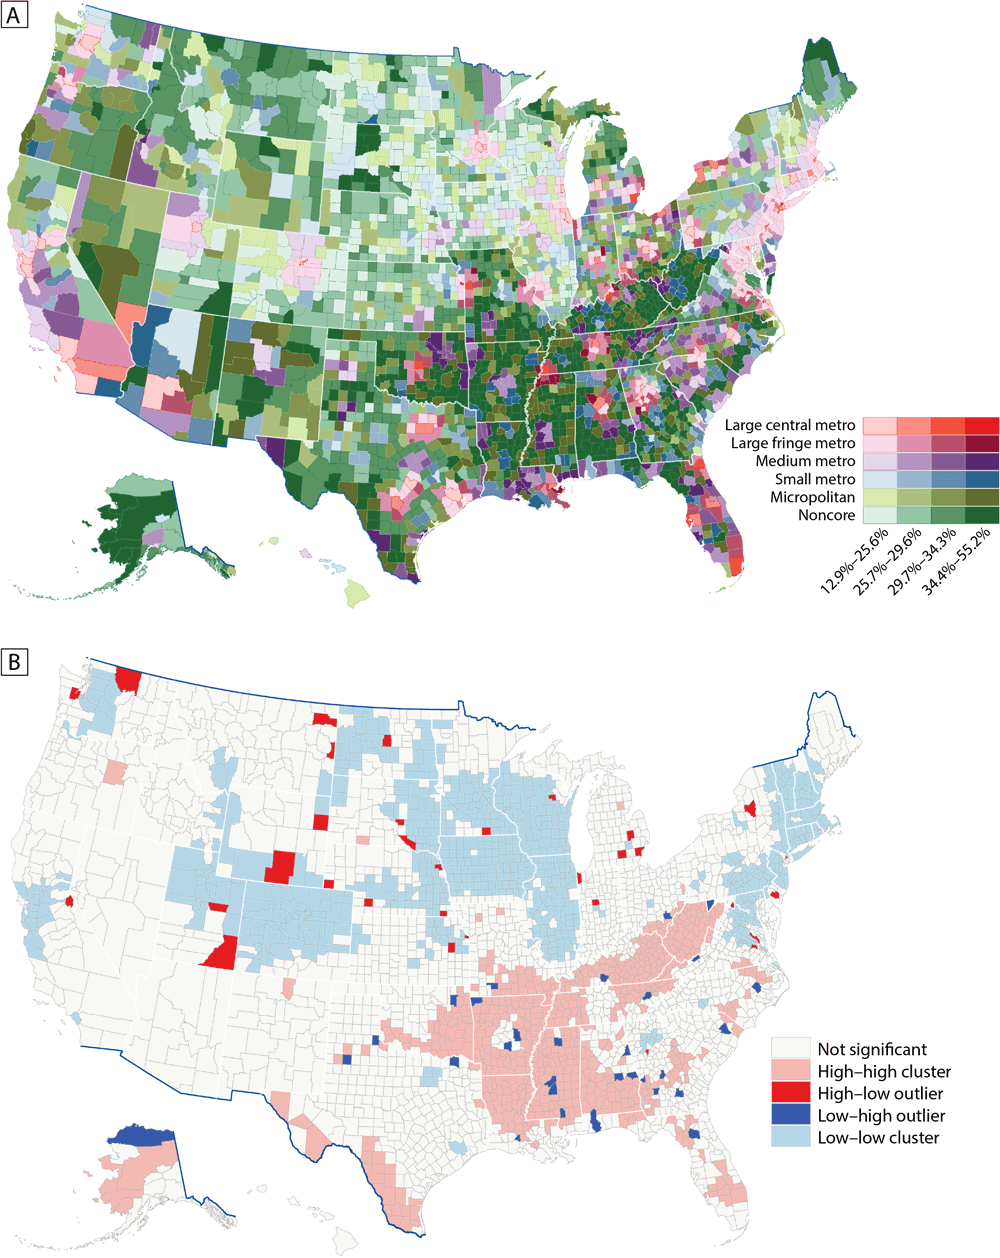 Model-based estimates of any disability among adults aged ≥18 years by county, United States, 2018. A, Prevalence by urban–rural status, classified by quartiles. B, Prevalence by cluster-outlier analysis. Data sources: Behavioral Risk Factor Surveillance System 2018 (10), US Census Bureau (15,16).